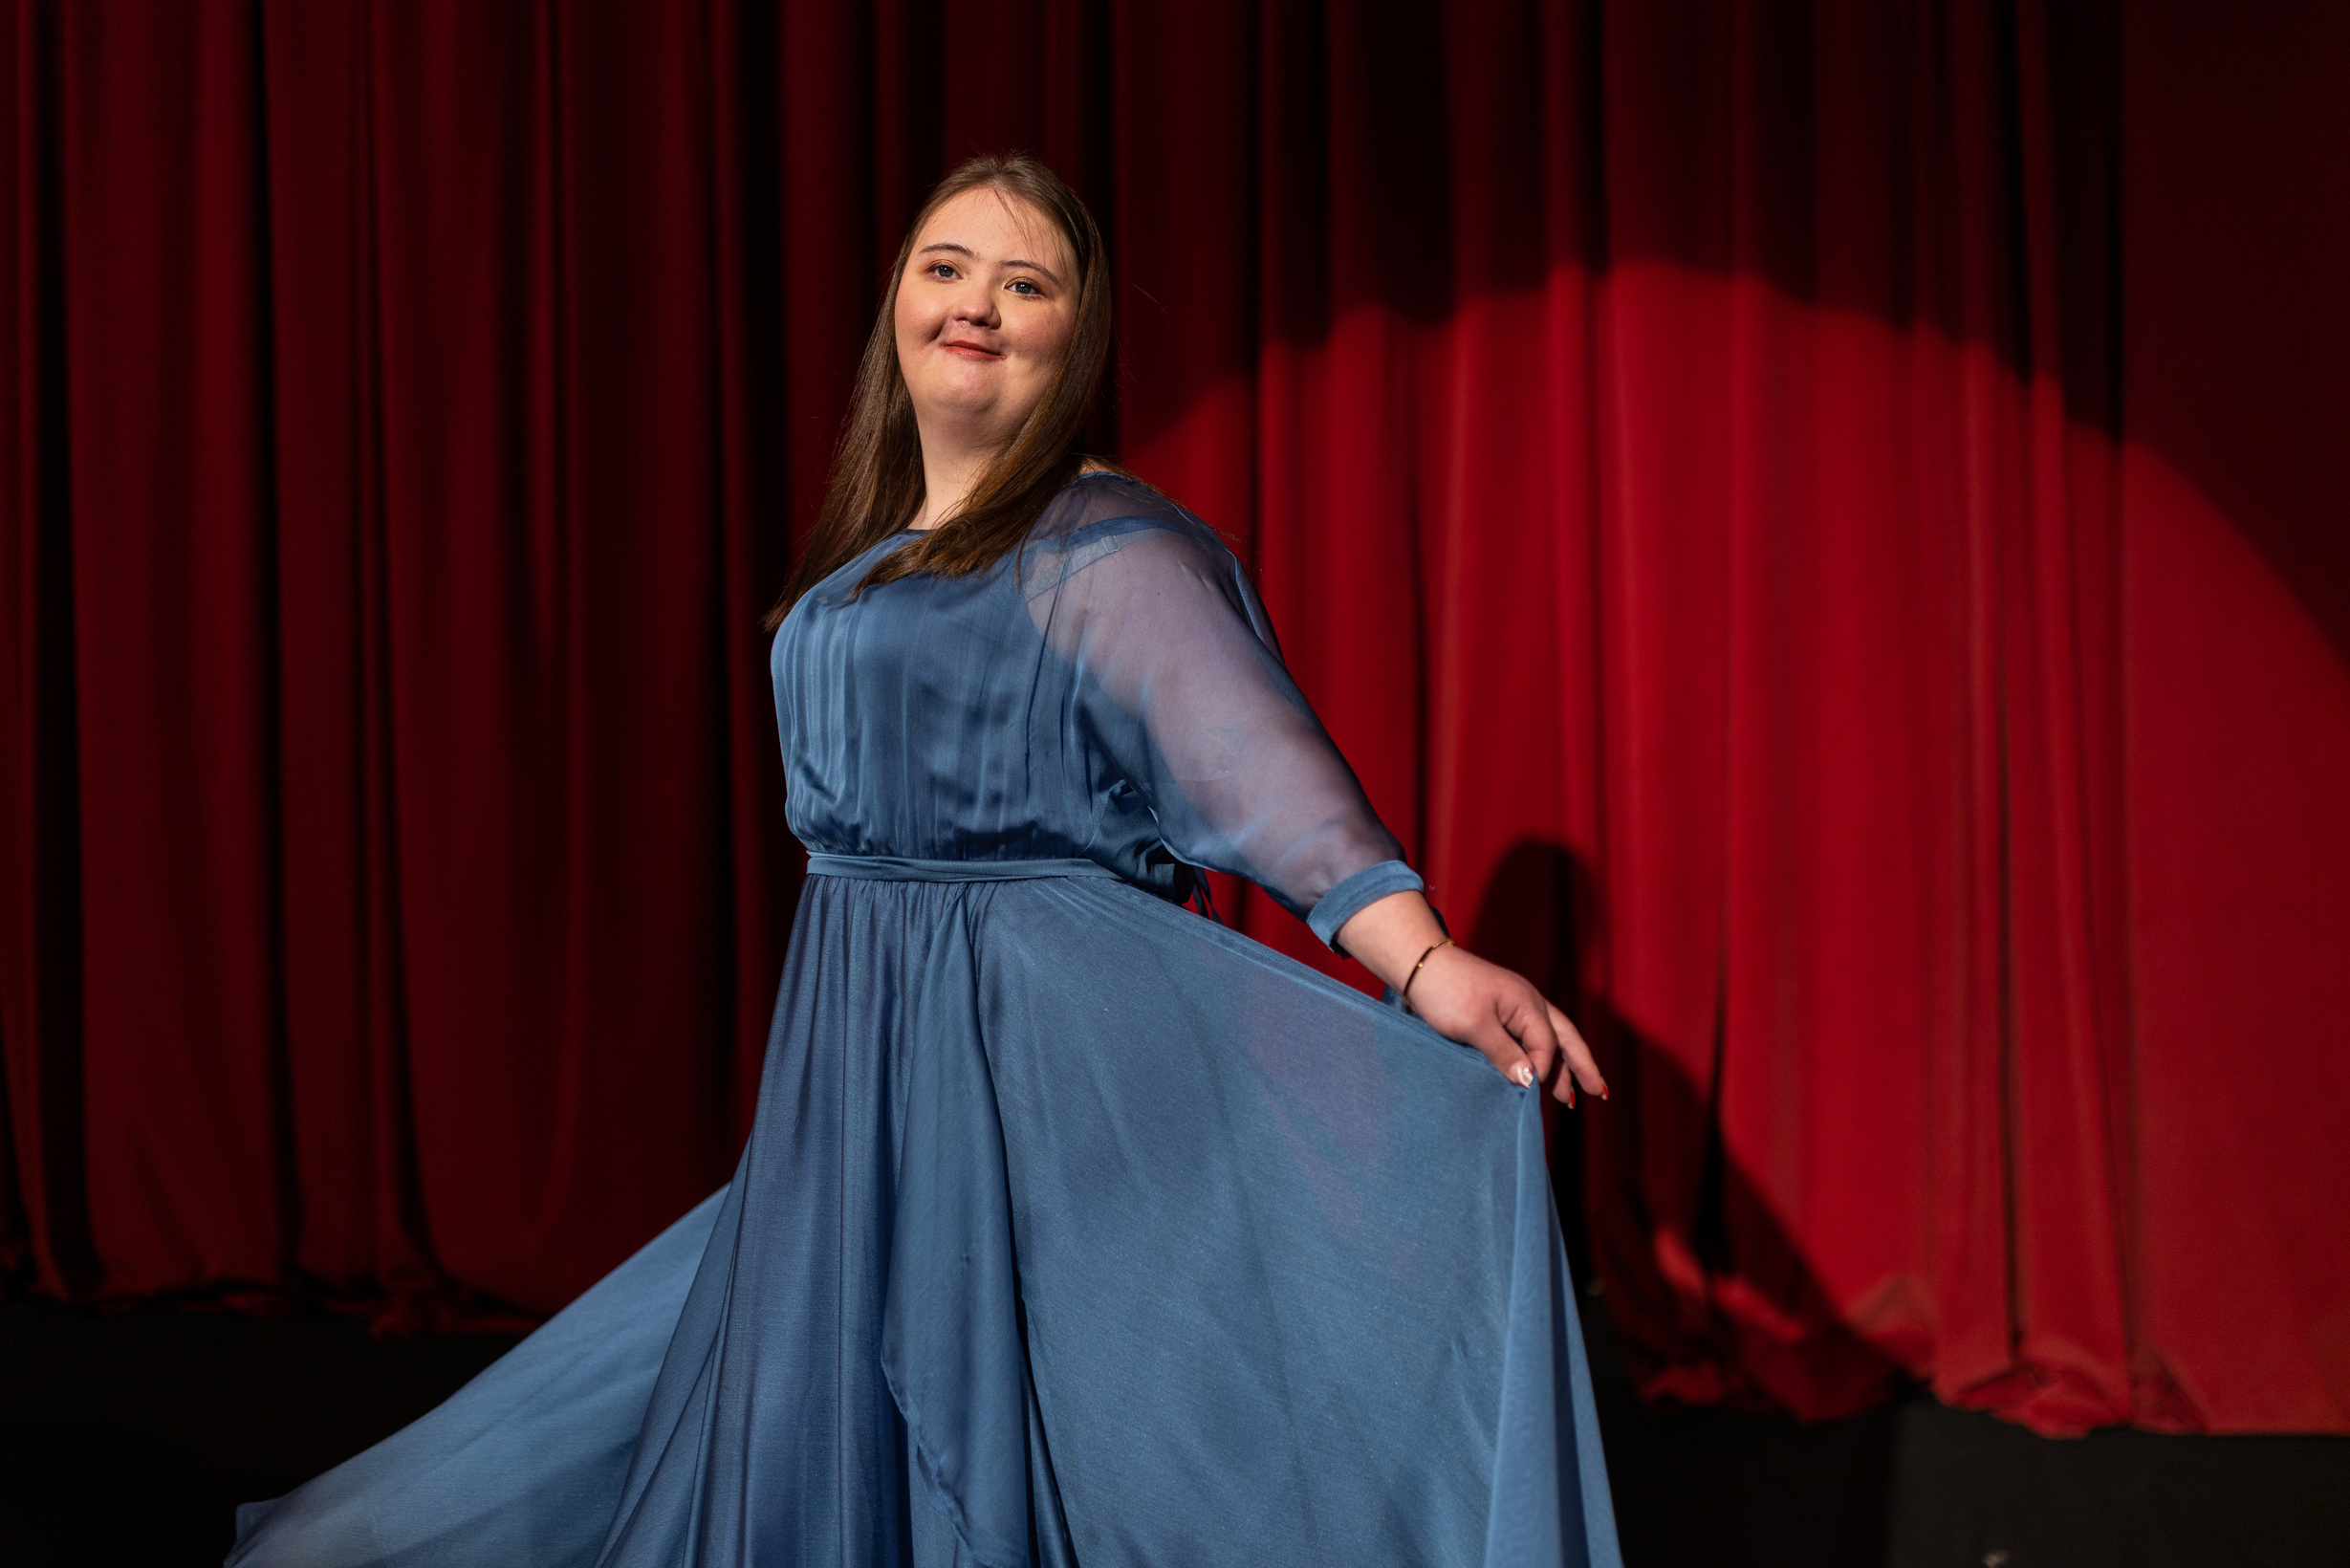 Young woman with down syndrome dancing on stage